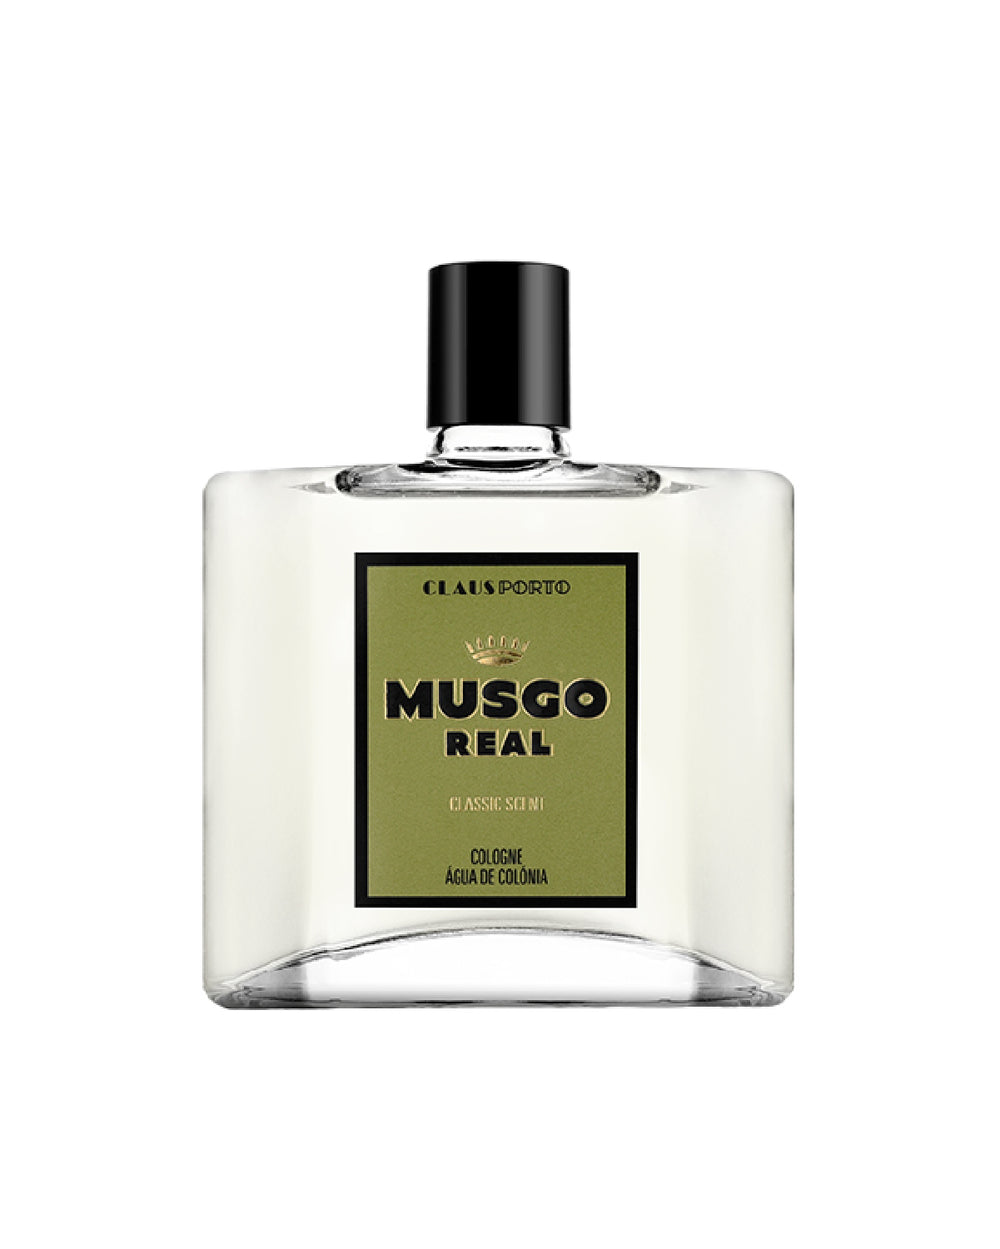 Musgo Real Cologne Classic Scent